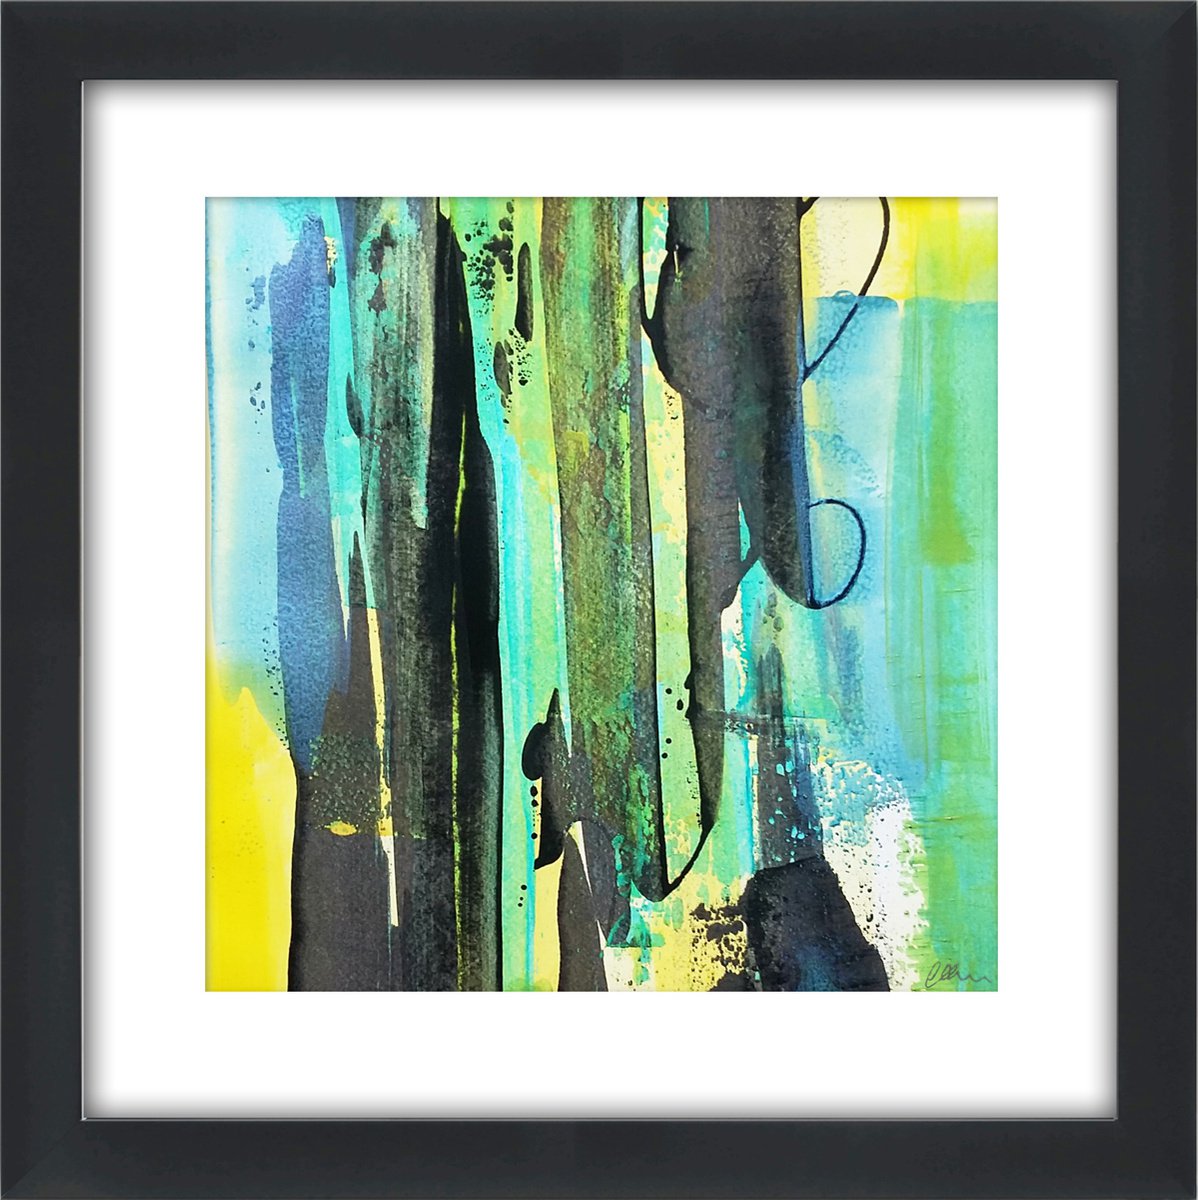 Illuminations #3 - Framed and ready to hang - original abstract painting by Carolynne Coulson